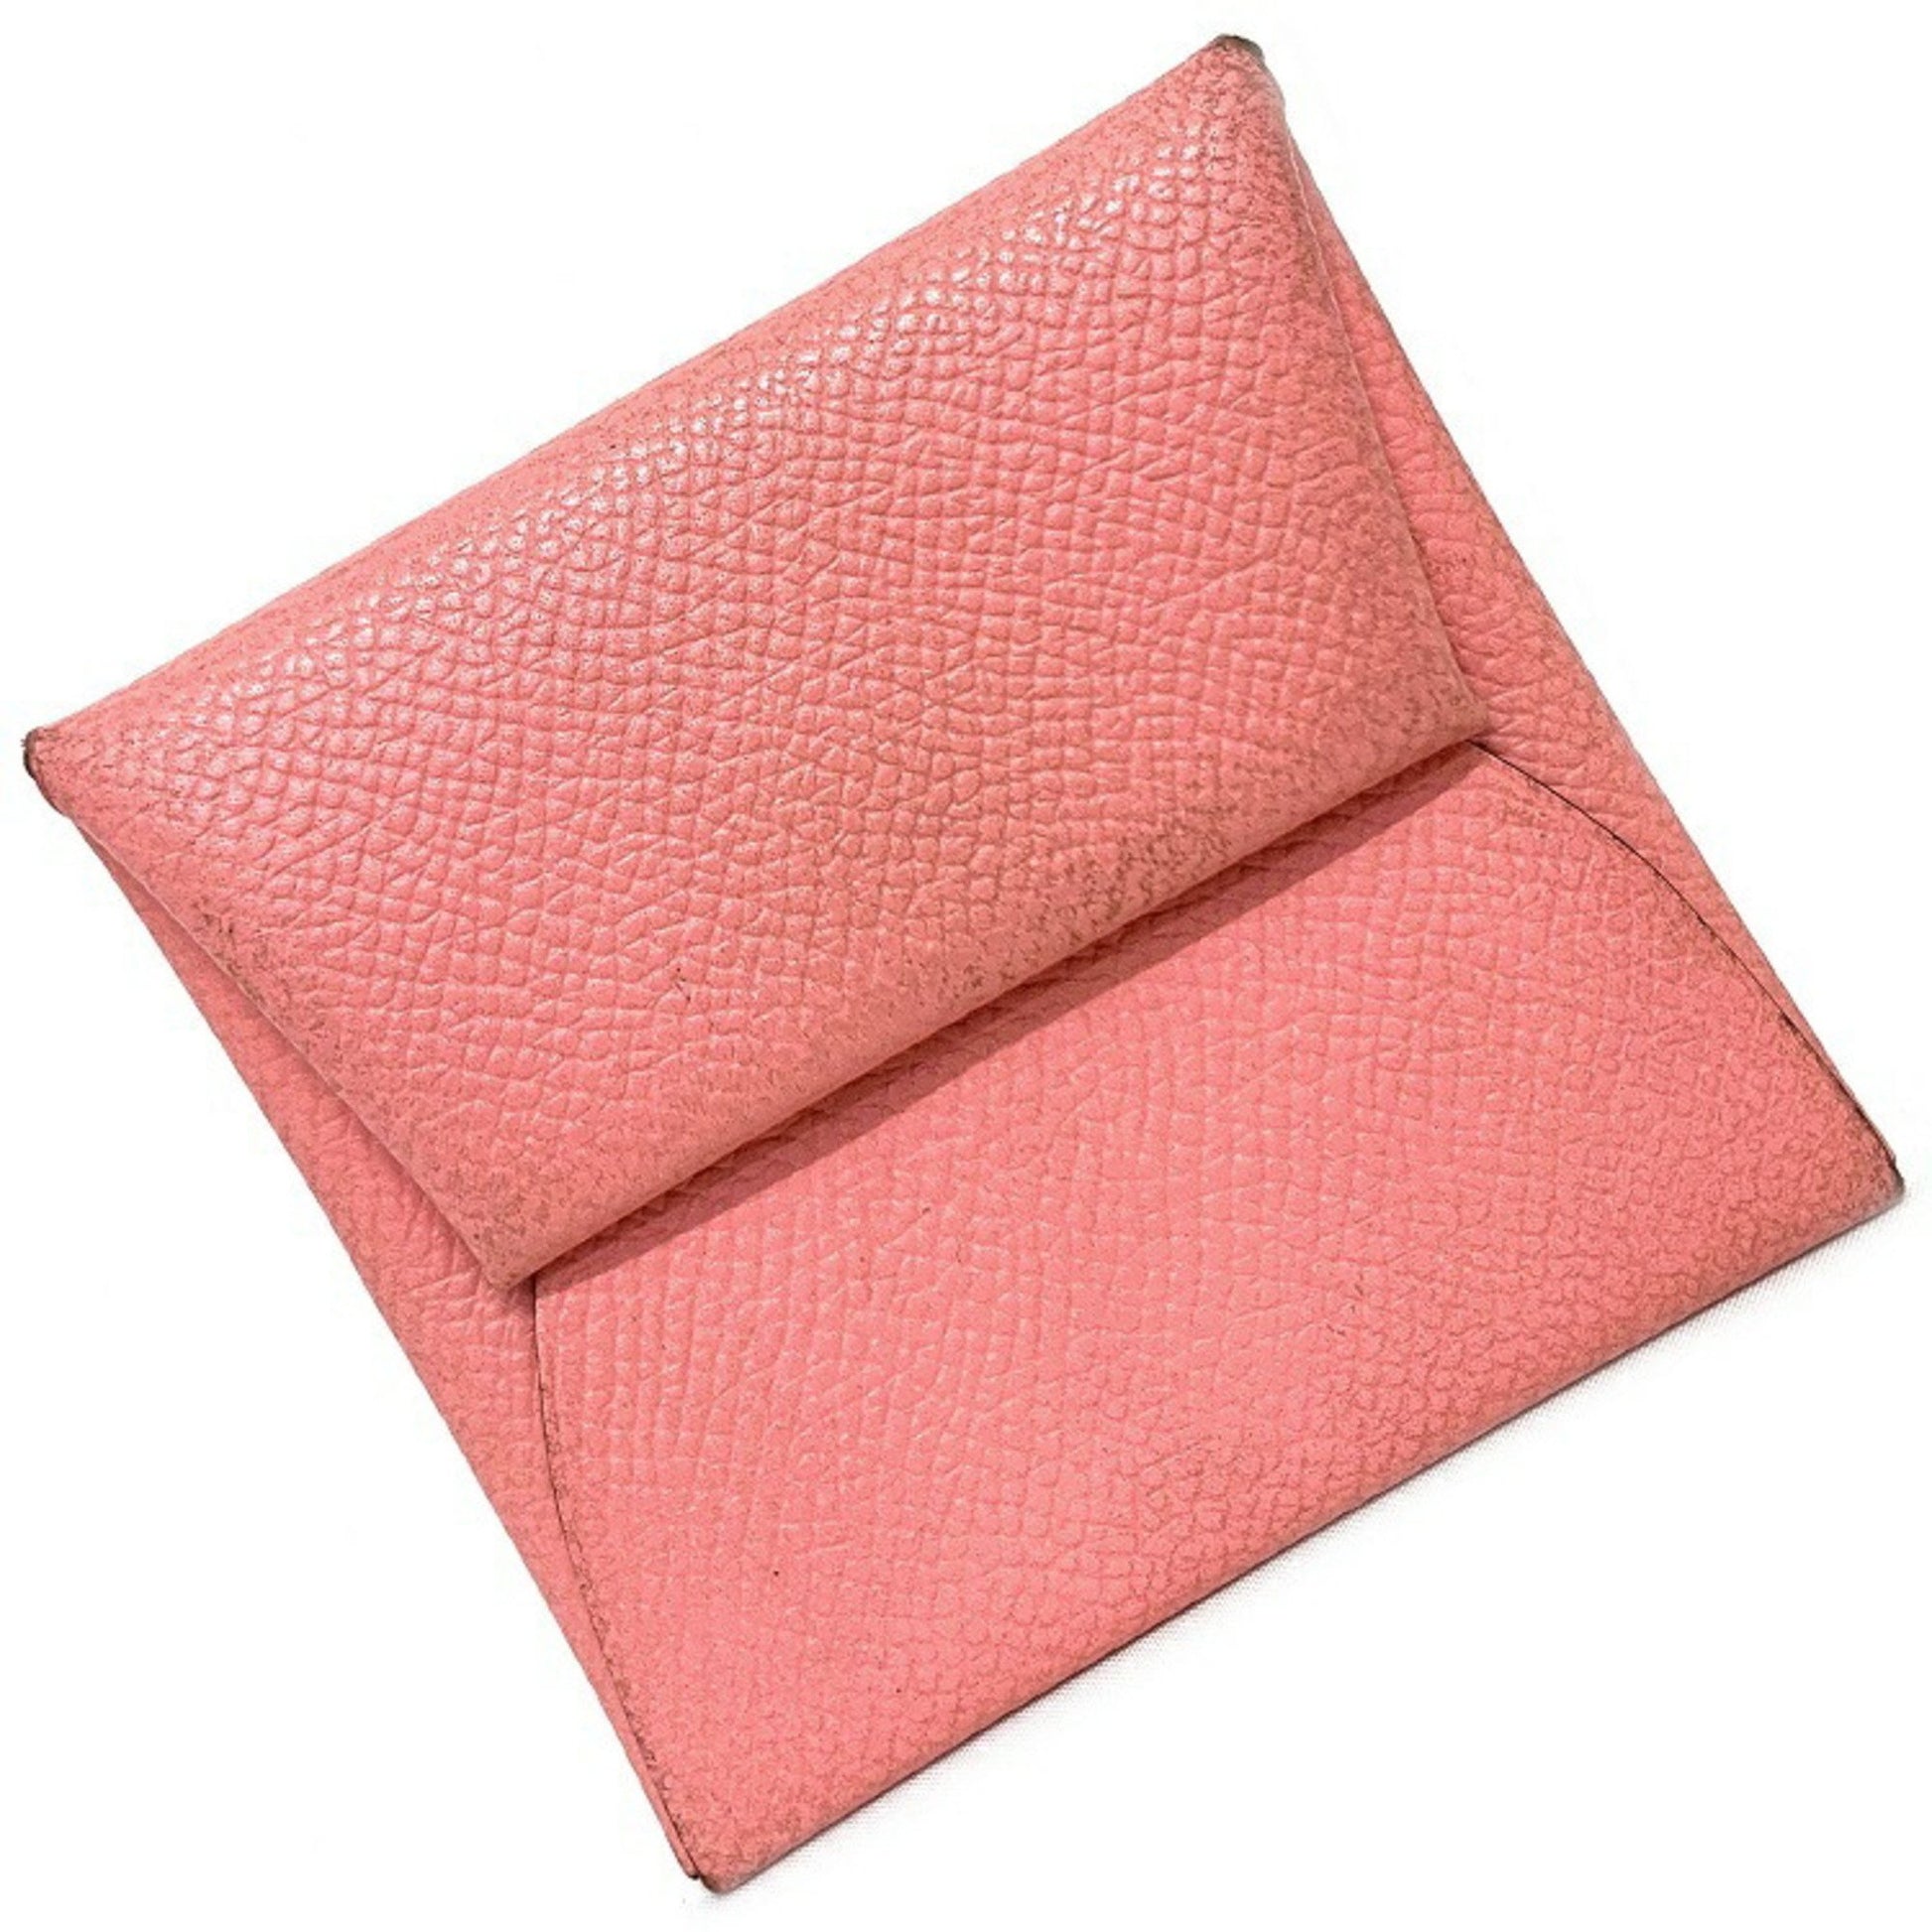 Hermes Bastia Rose Confetti Pink Coin Case Taurillon Clemence P